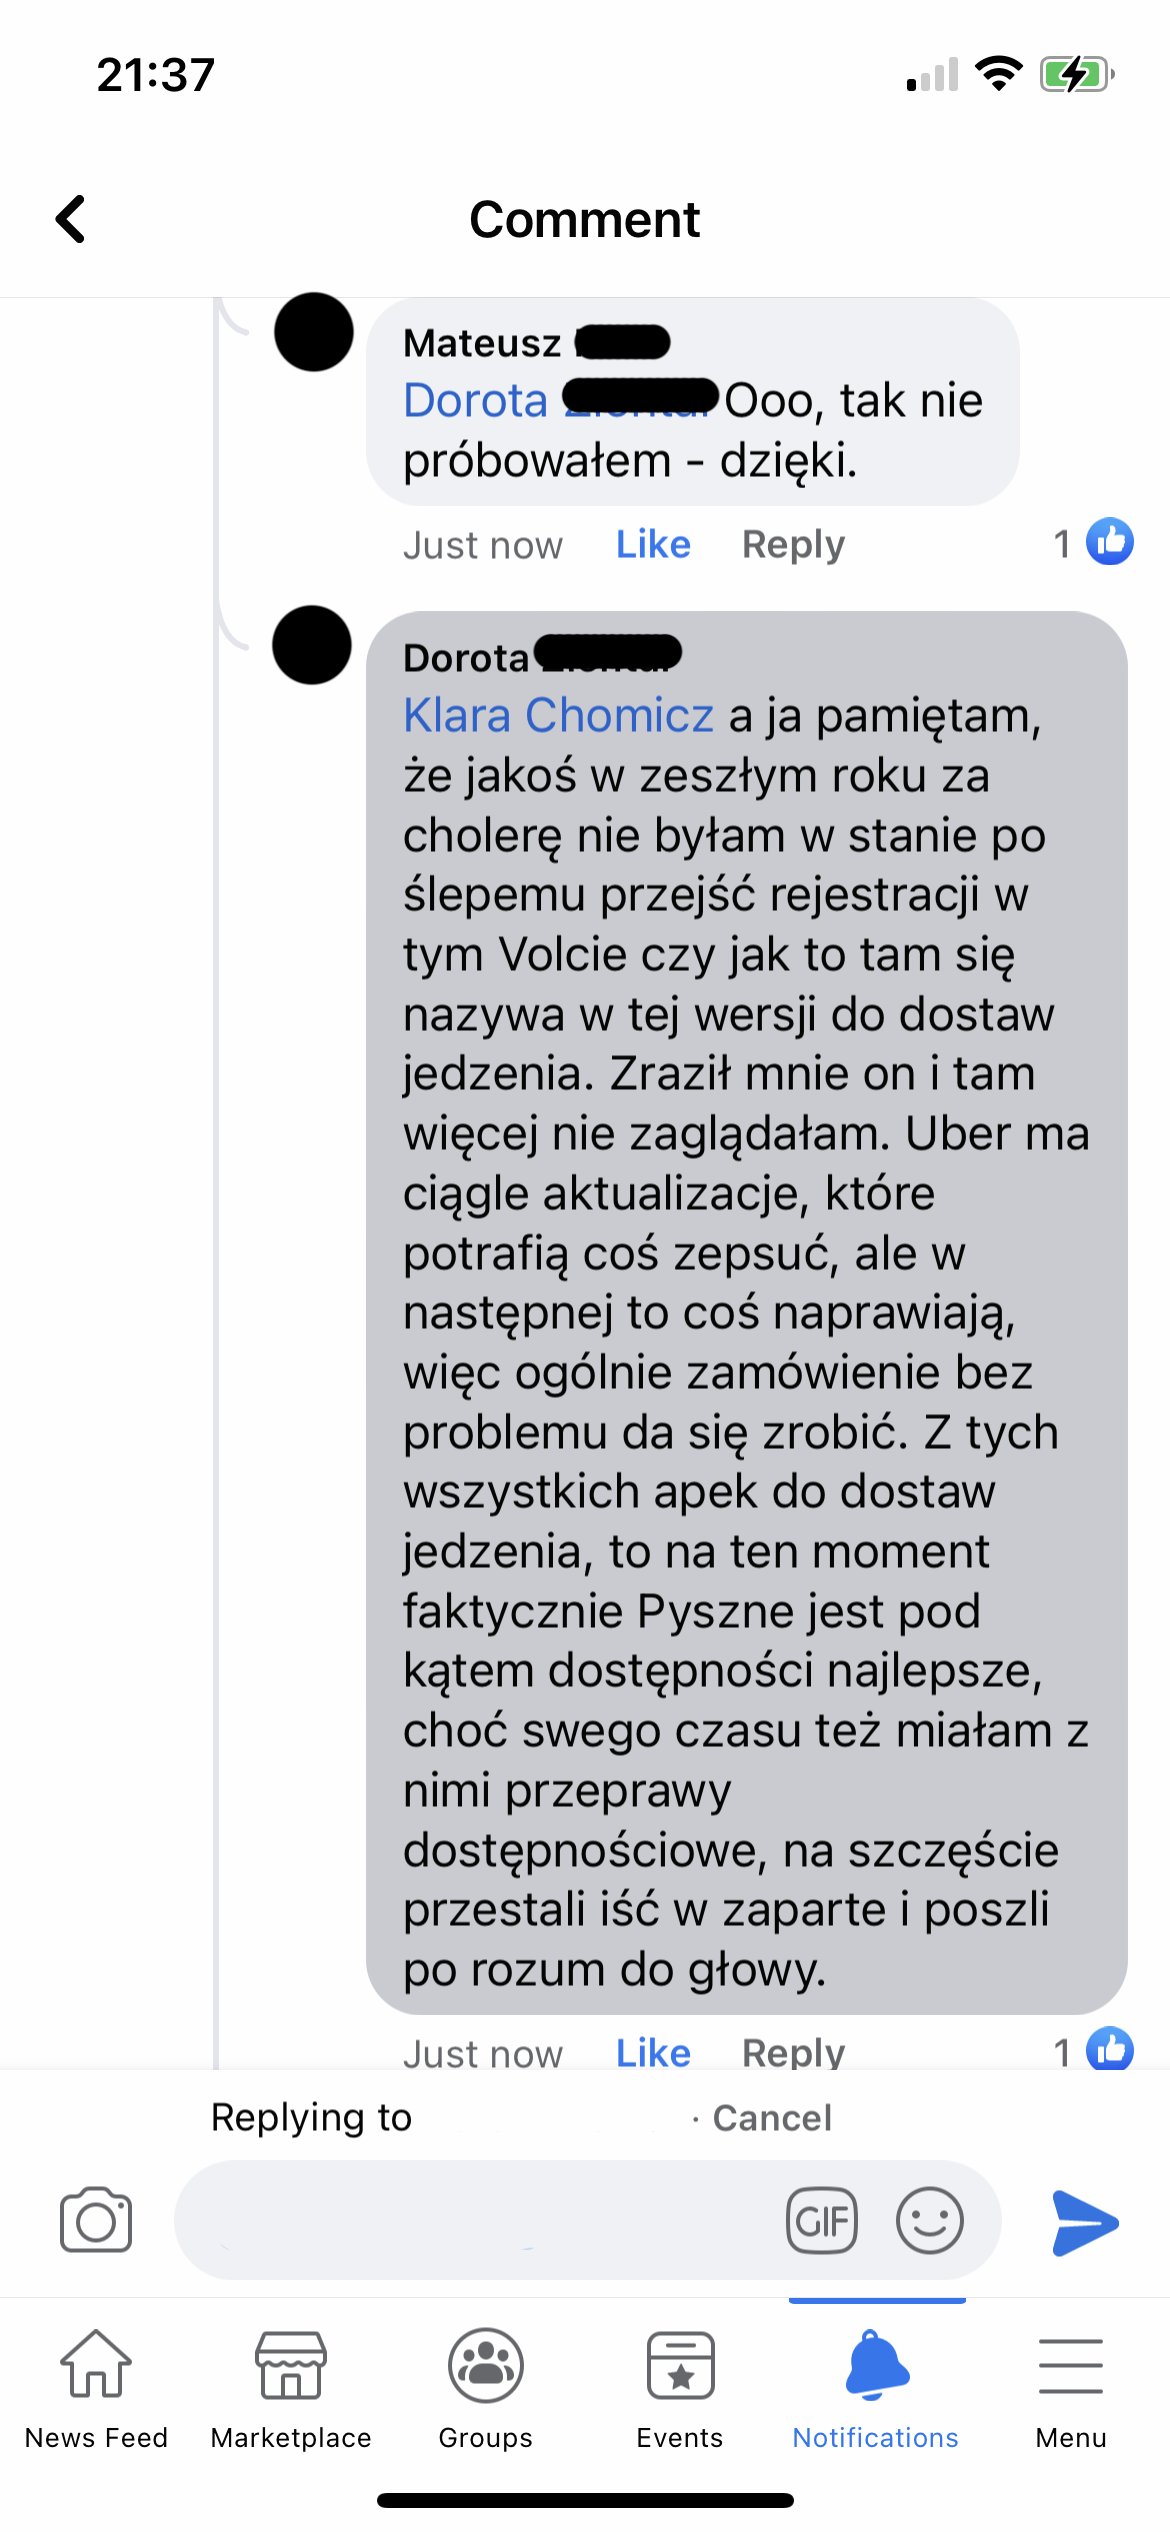 This user said that on of the apps wouldn’t even allow her to sign up. Another app had constant updates that would break something, but then it would always get fixed so it was possible to order. She also confirmed what the users have said about pyszne, being the most accessible.